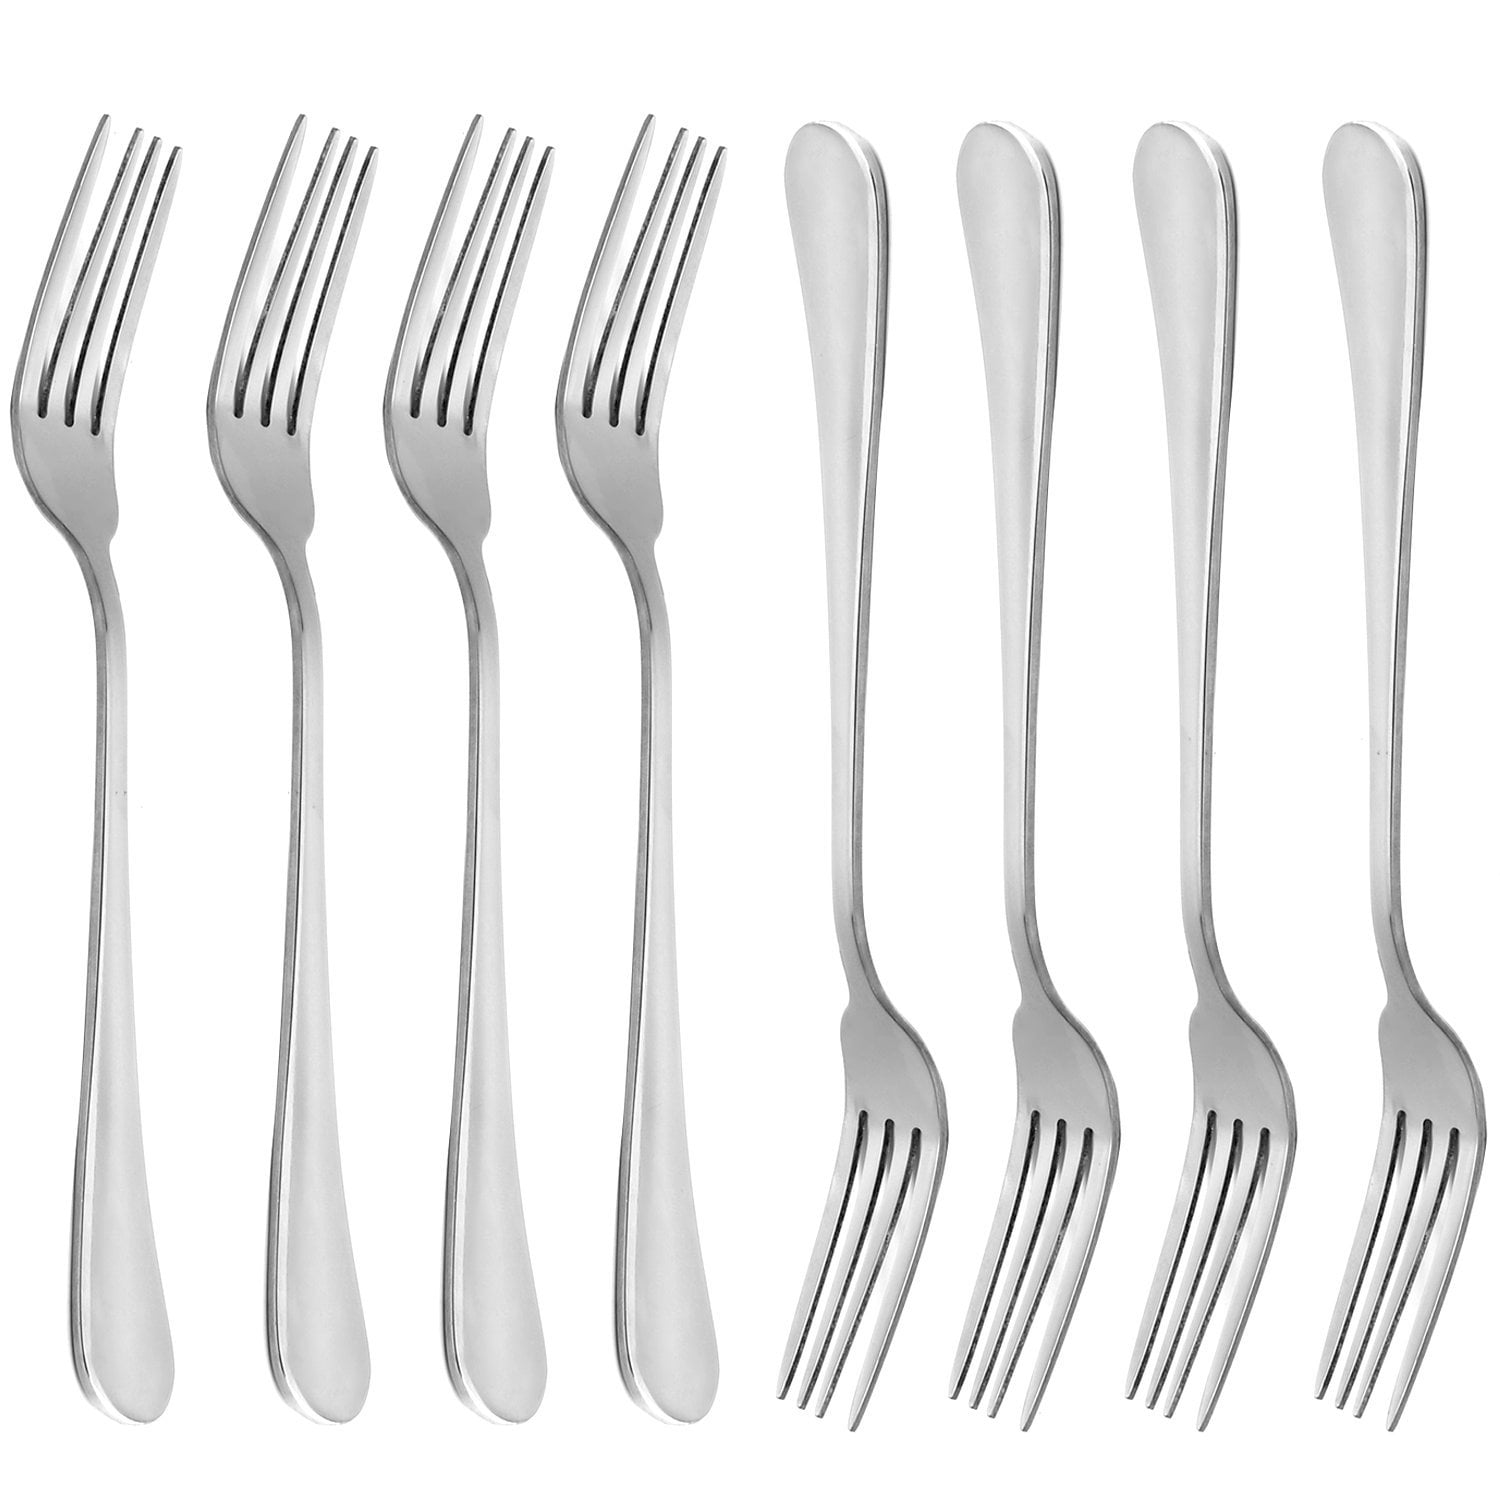 18/10 Stainless Steel Dinner Fork 8-Inch Set of 12,Heavy Duty and Dishwasher Safe 